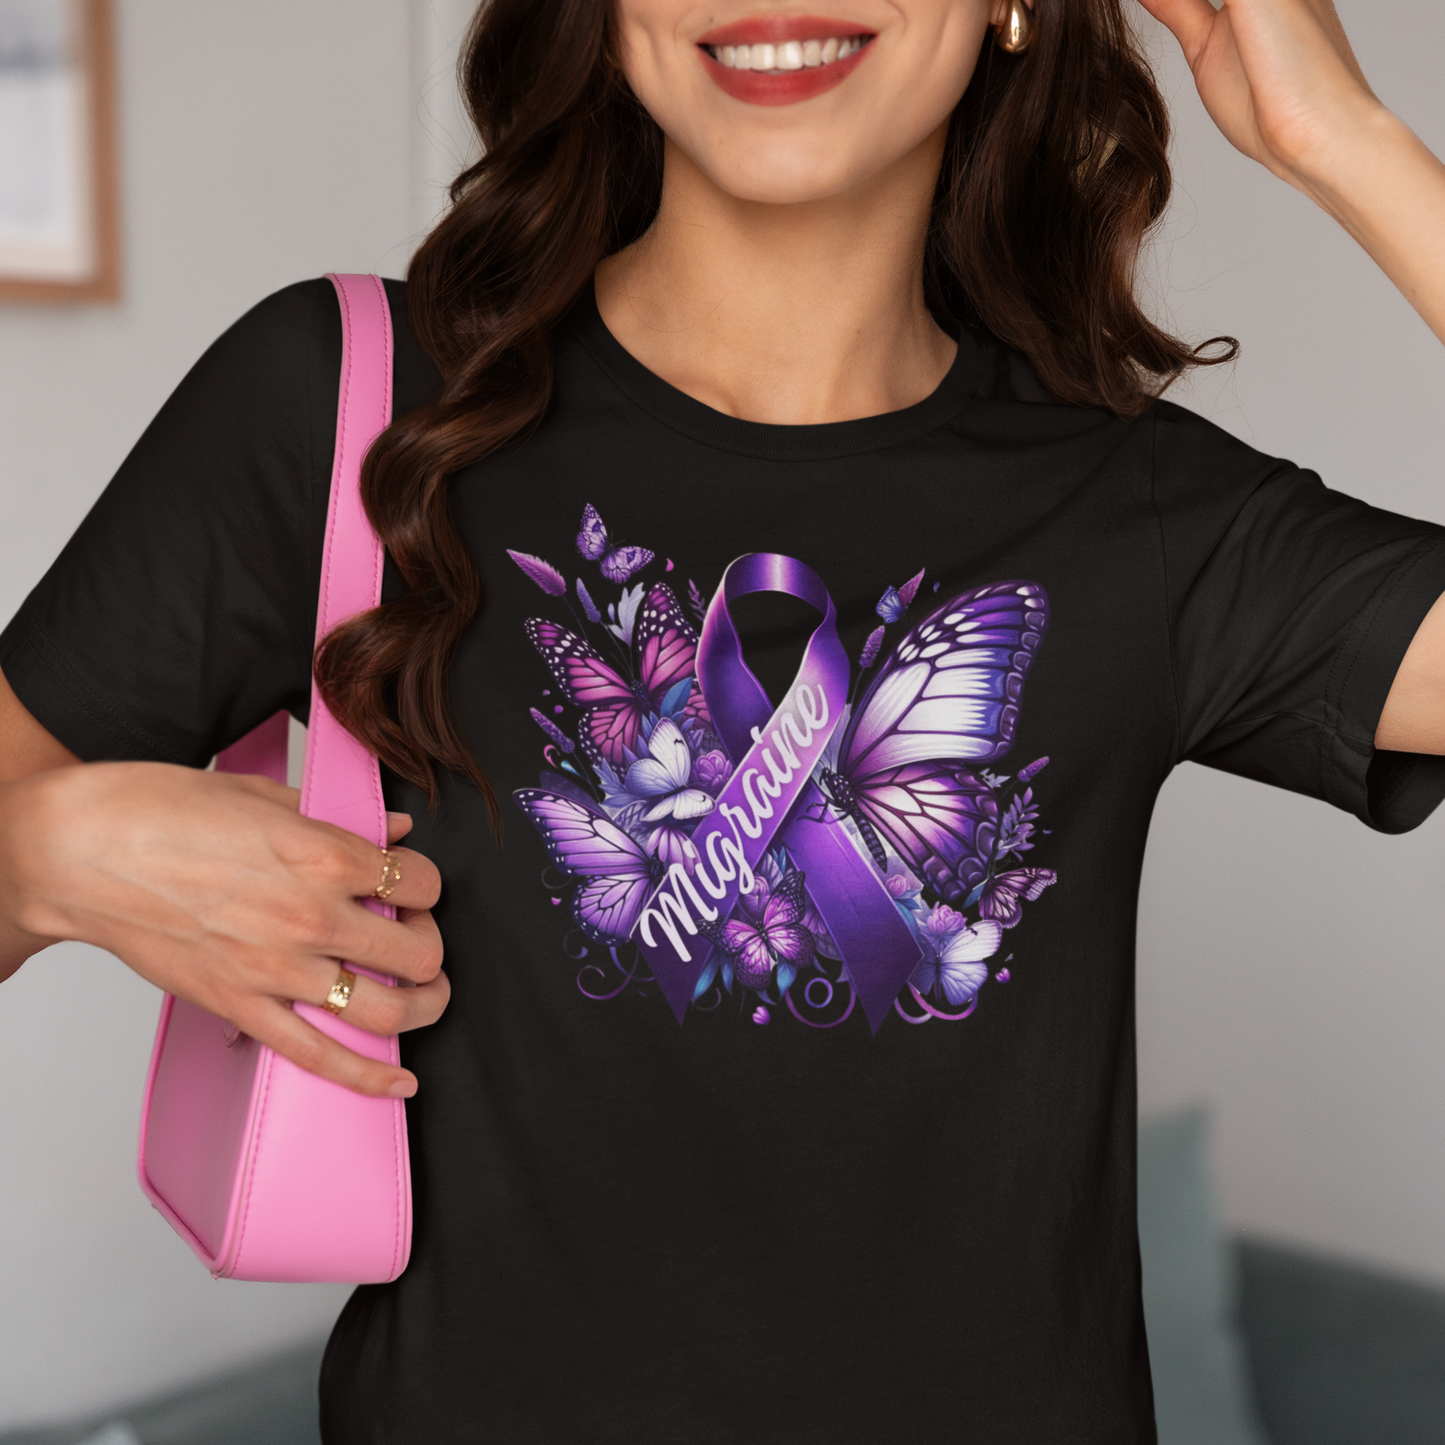 Woman with dark hair and red lipstick carrying a pink purse is wearing a black Migraine Awareness t-shirt with a purple Migraine ribbon and butterflies and flowers